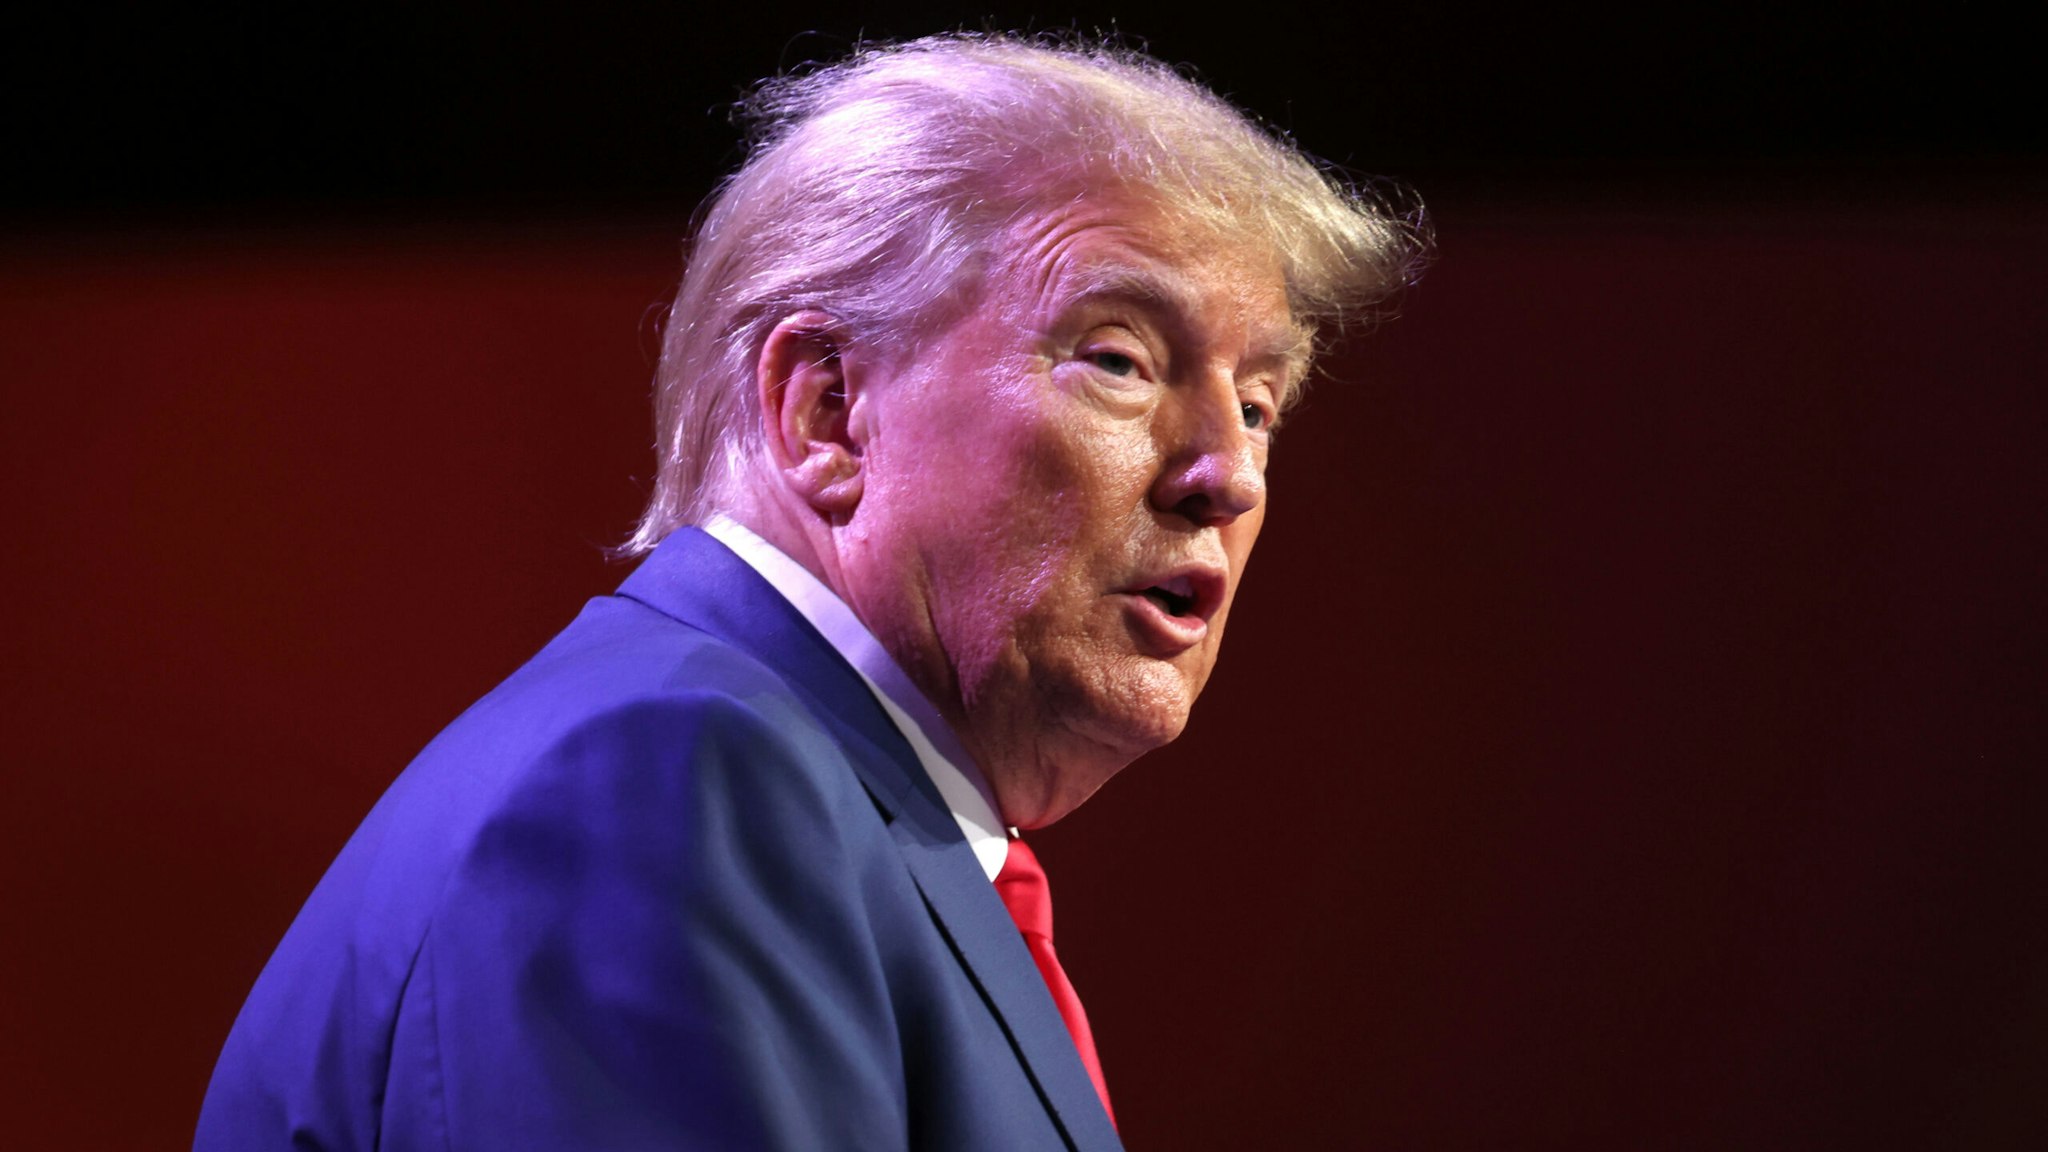 DES MOINES, IOWA - JULY 28: Republican presidential candidate former President Donald Trump speaks to guests at the Republican Party of Iowa 2023 Lincoln Dinner on July 28, 2023 in Des Moines, Iowa. Thirteen Republican presidential candidates were scheduled to speak at the event.